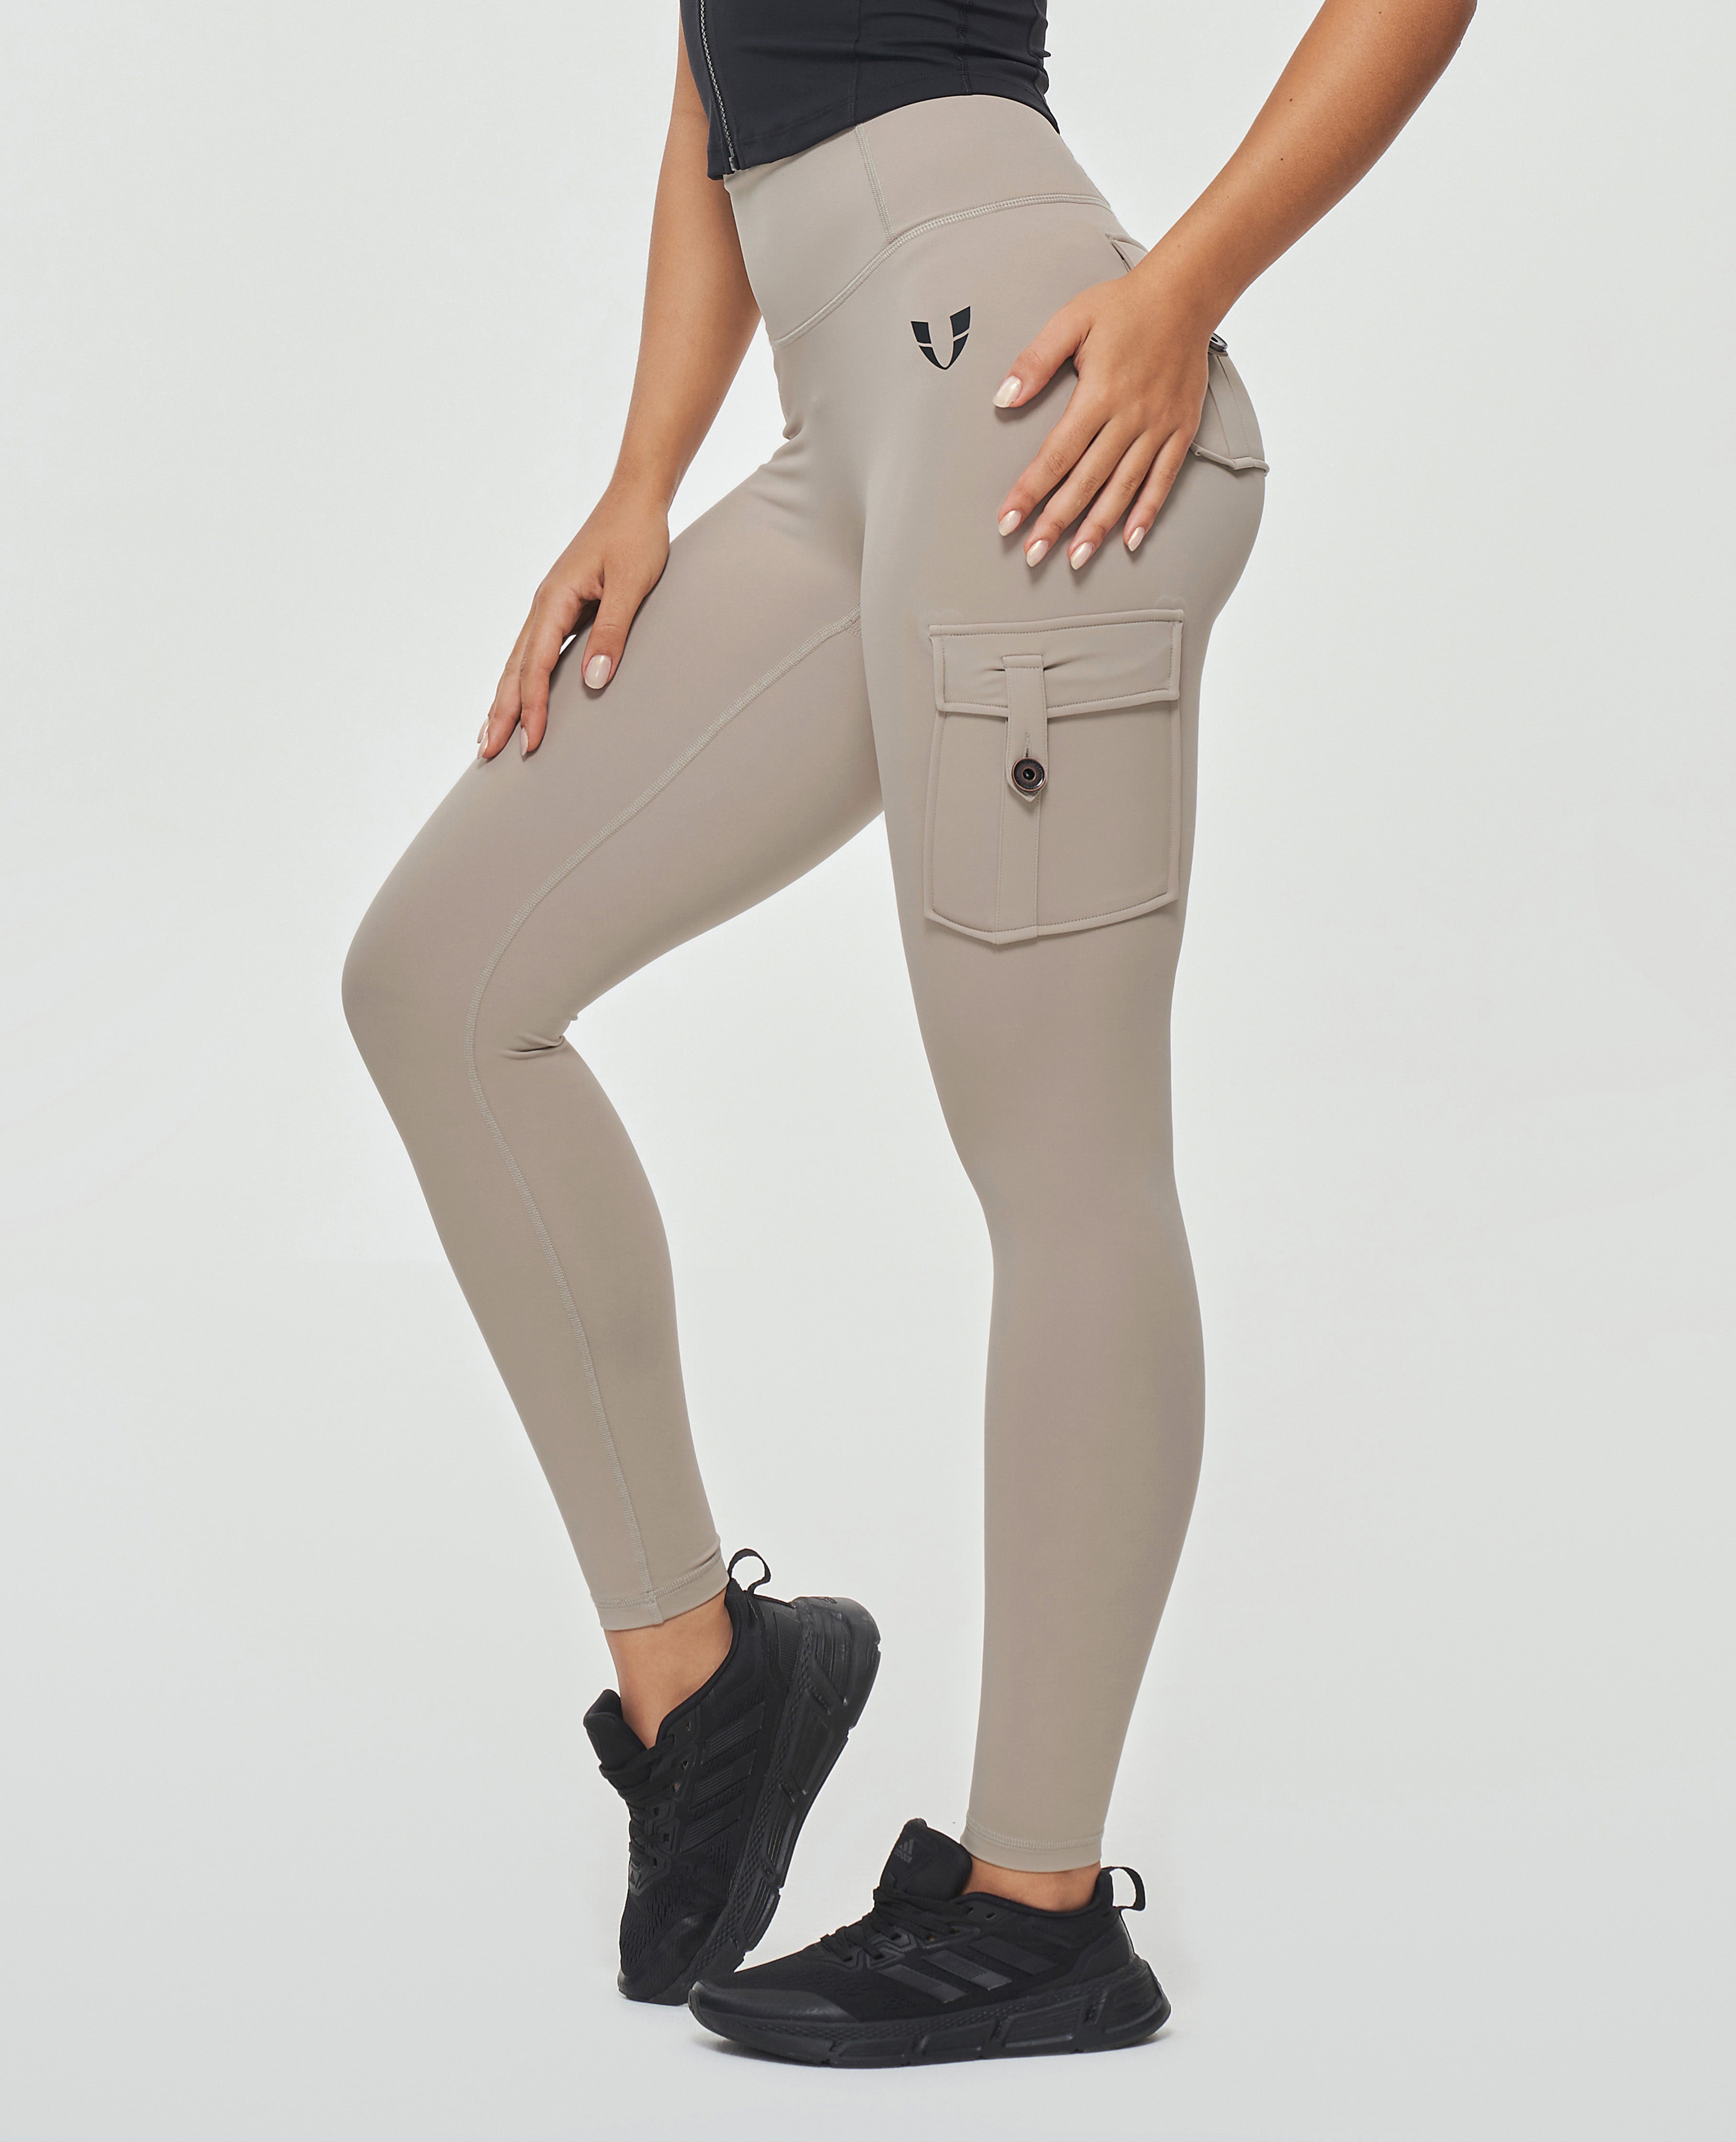 FIRMABS: Our Best Price Leggings, NEW ARRIVALS, FIRM ABS Sportswear